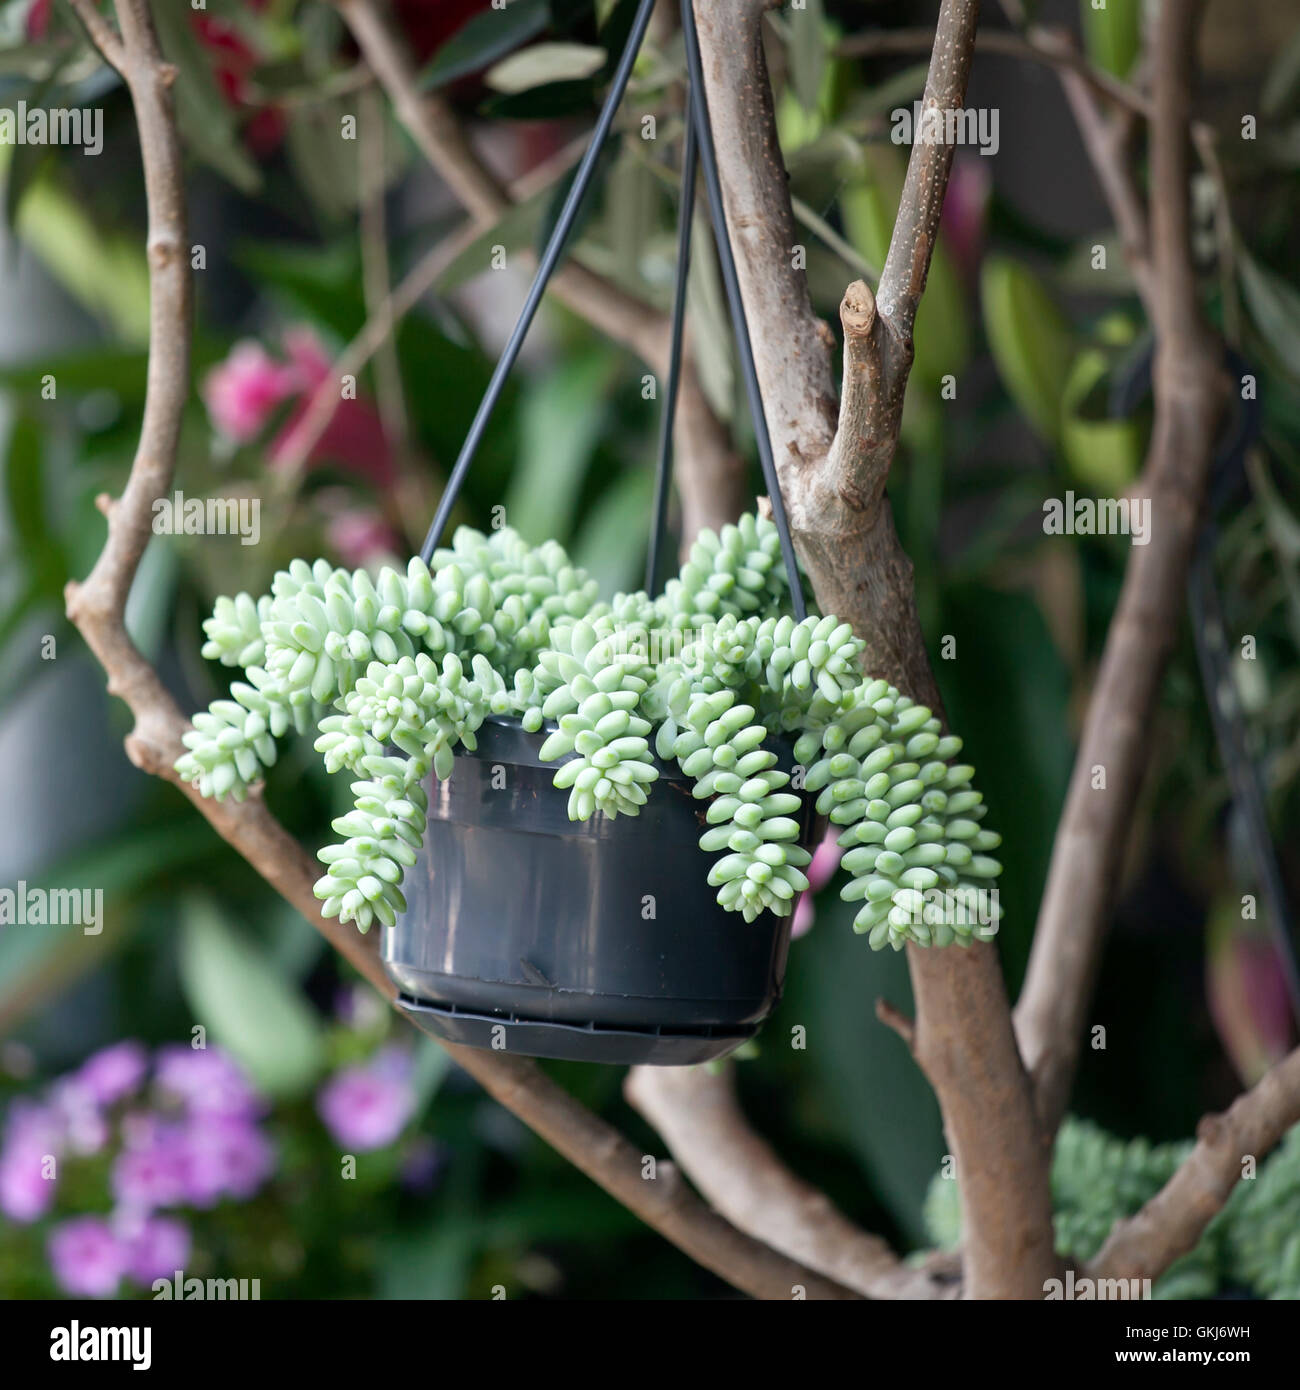 Burro's Tail or Jelly Bean Plant it's the name of this succulent plant. Stock Photo